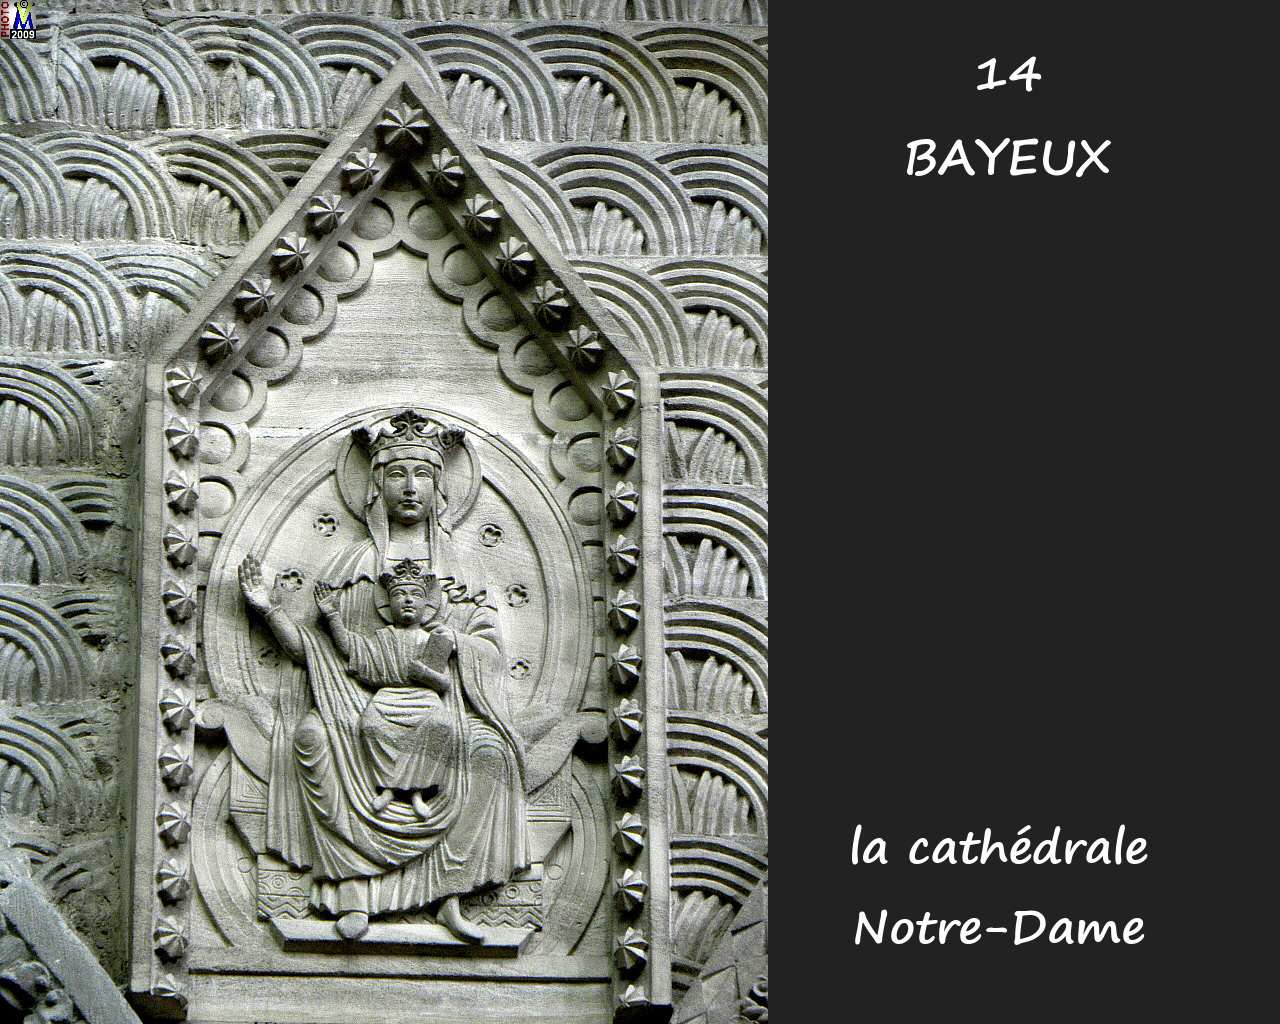 14BAYEUX_cathedrale_212.jpg